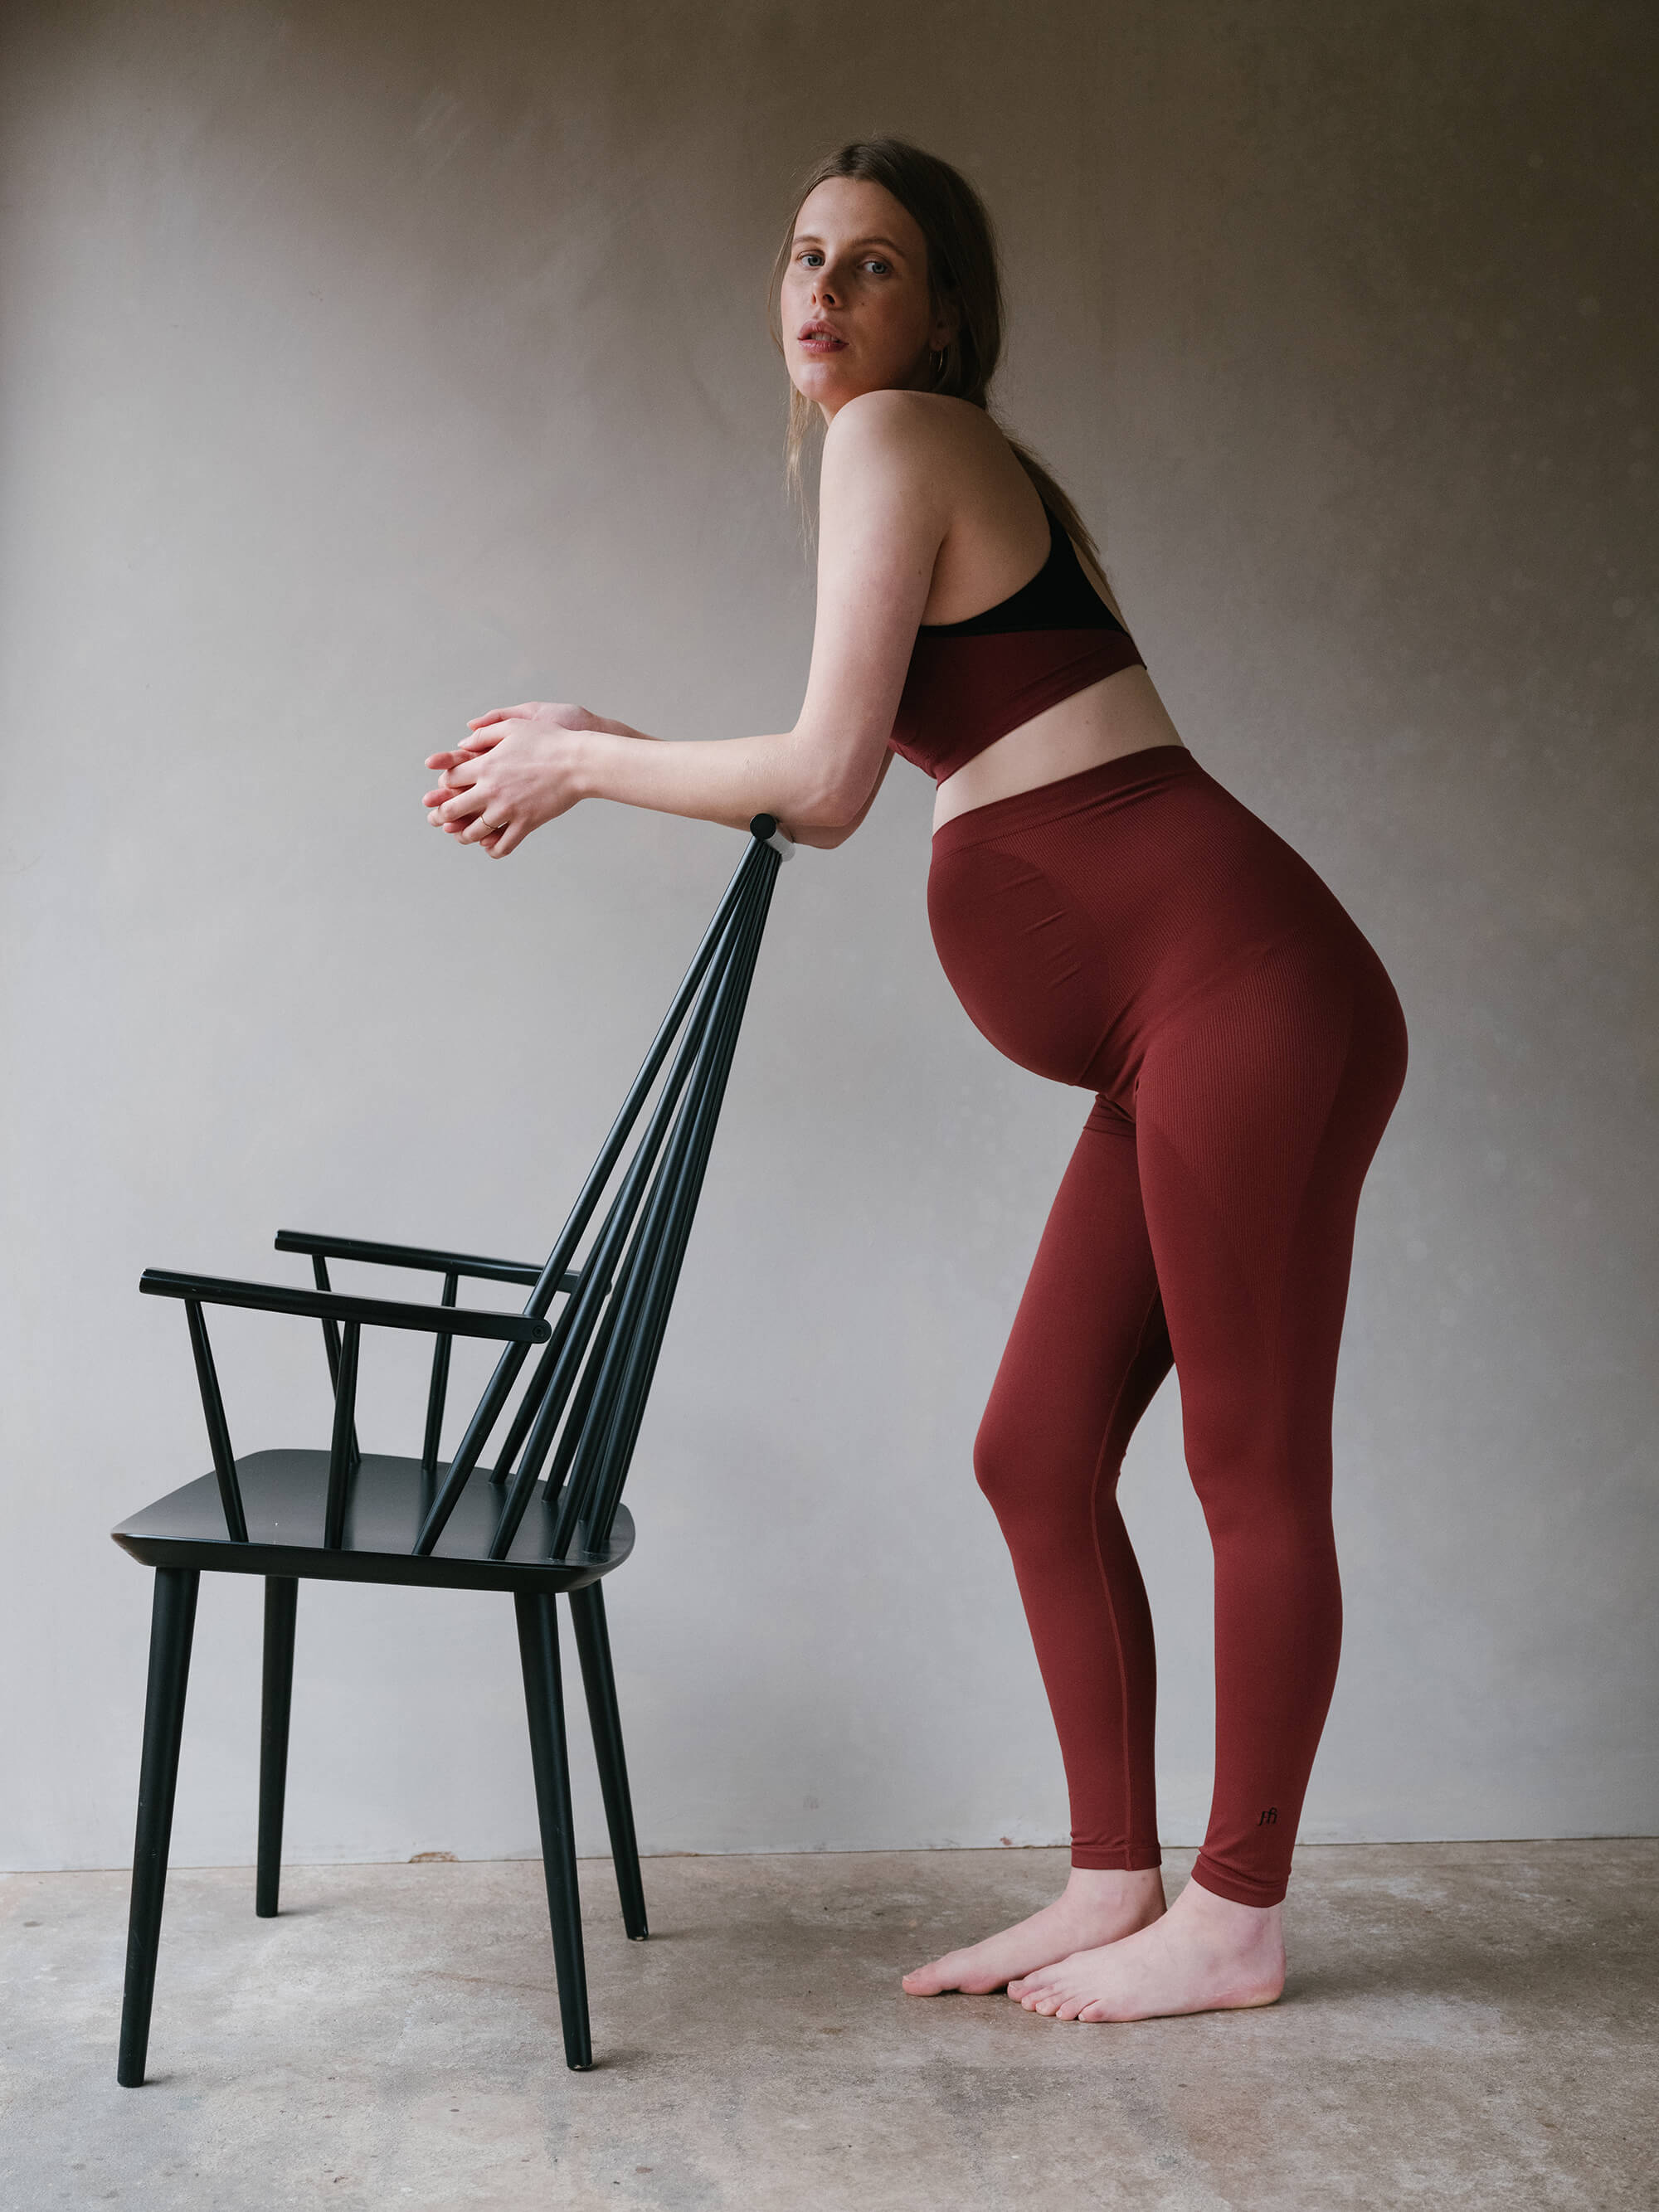 Girlfriend Collective Just Launched a New Maternity Collection